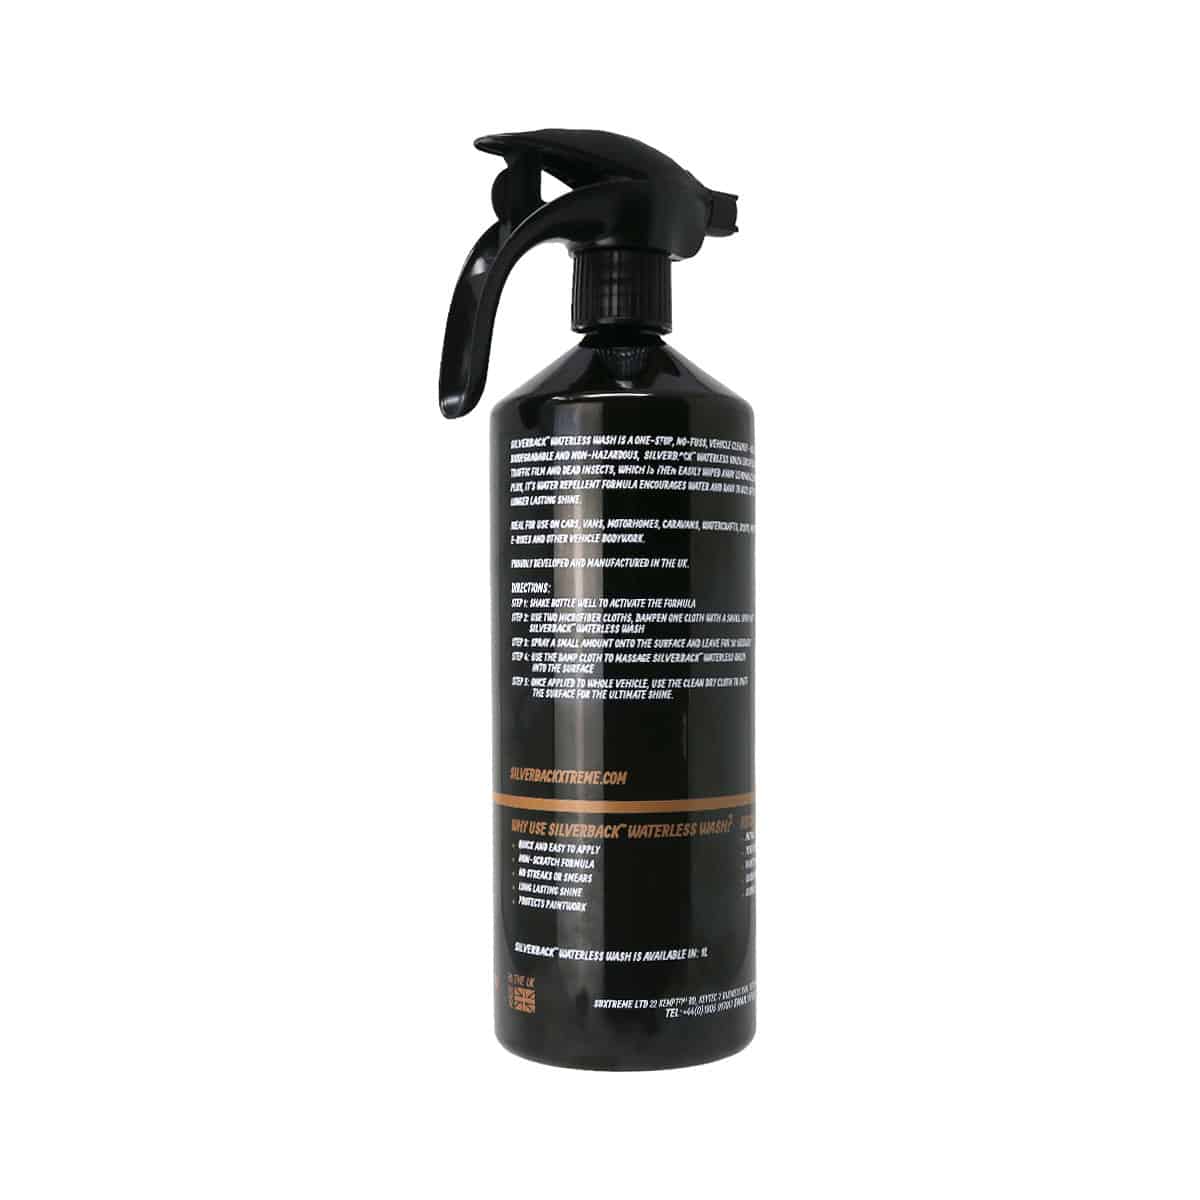 Silverback Waterless Wash: One-stop motorbike cleaner when there is no water instructions